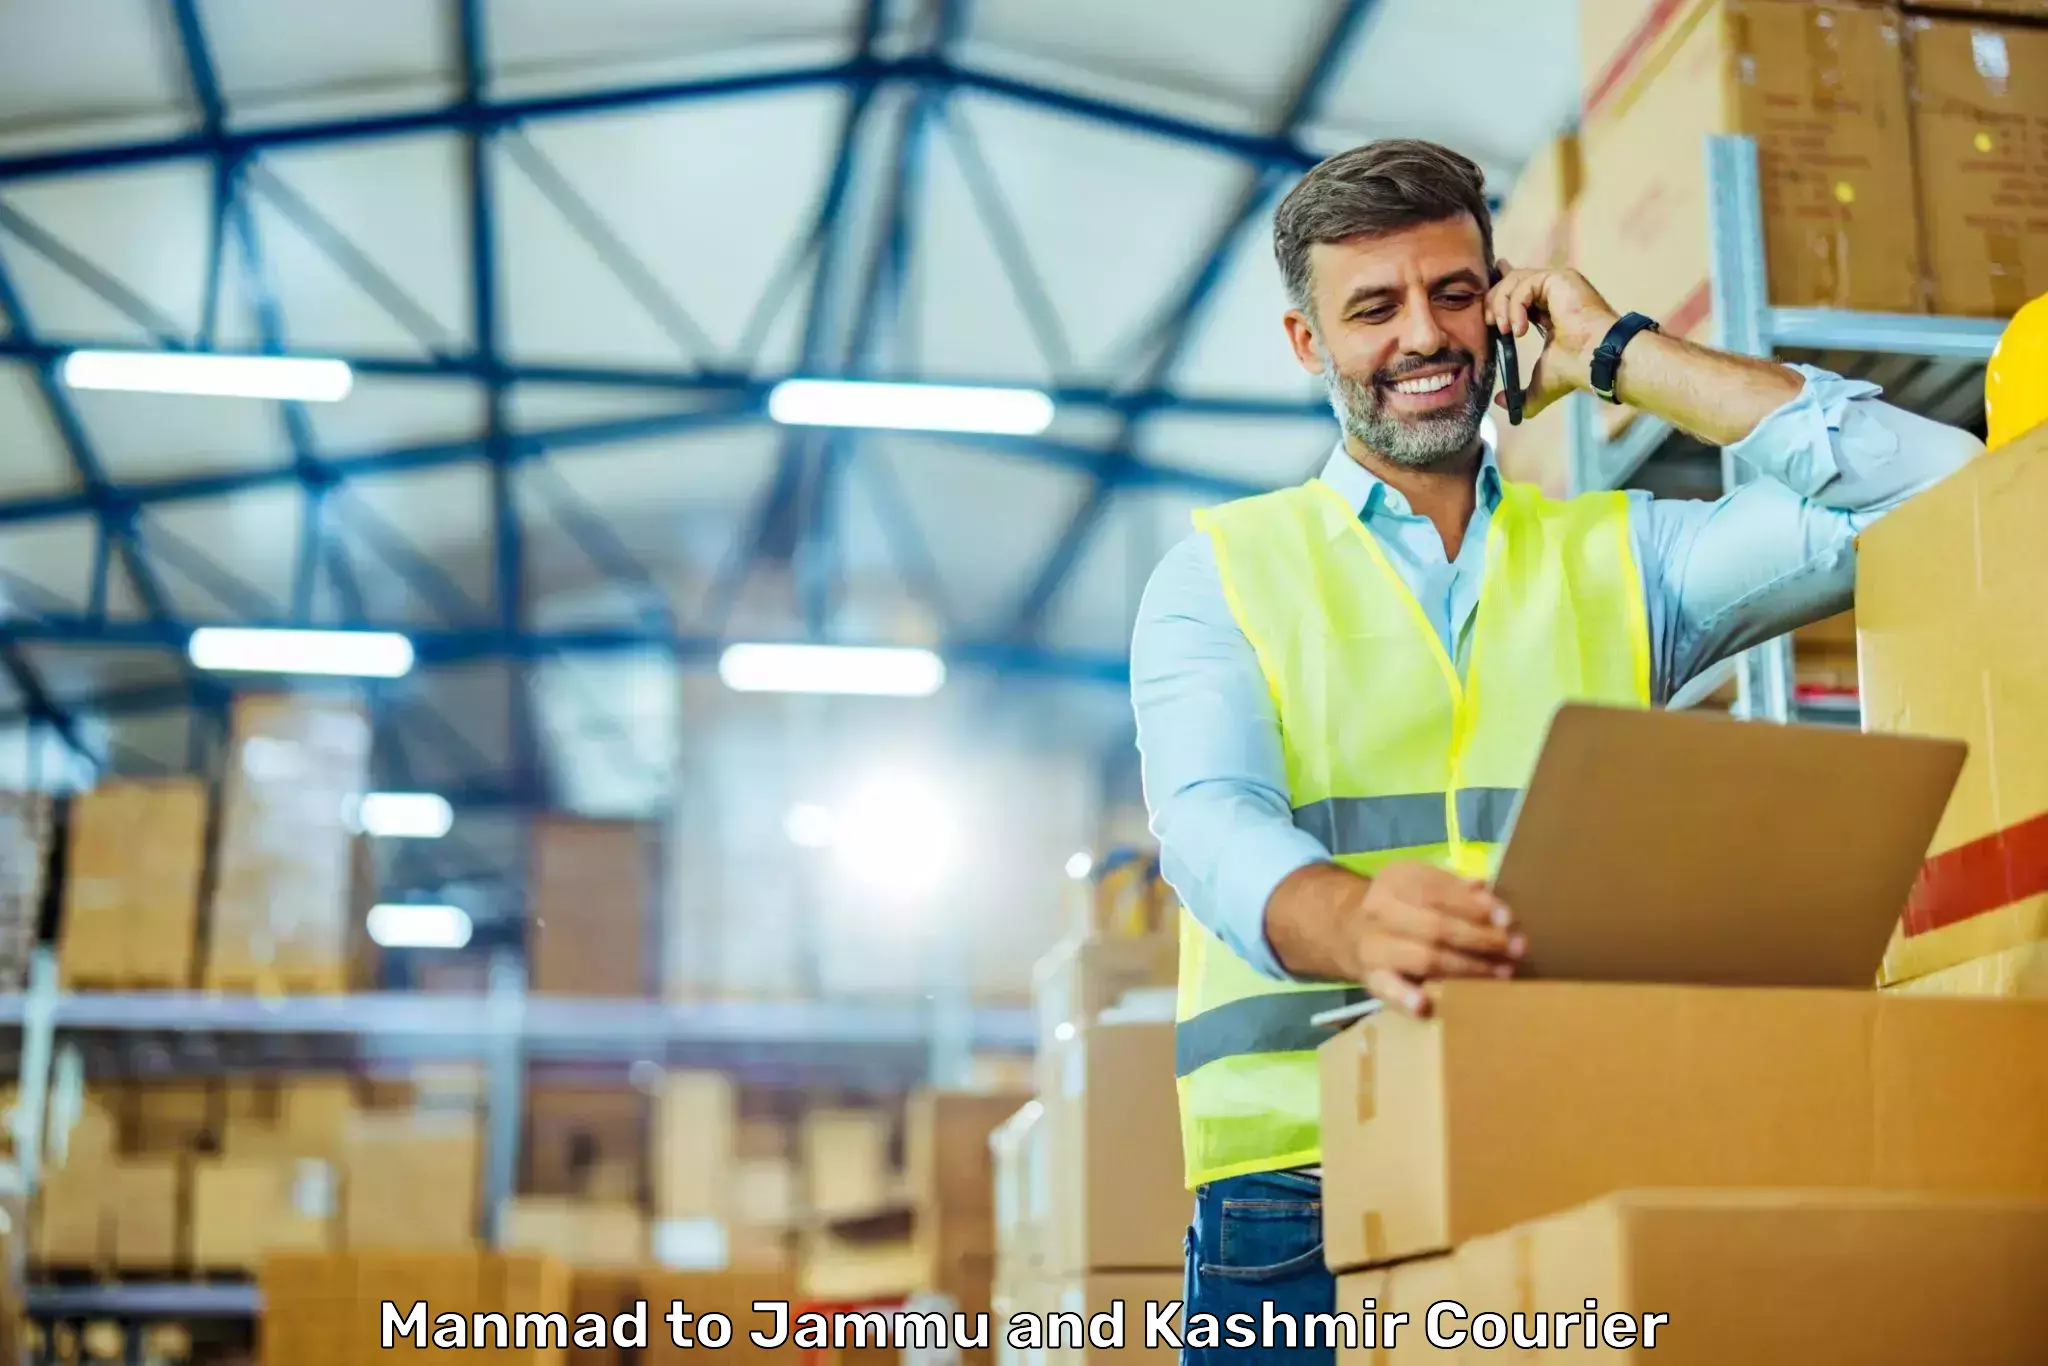 Global shipping solutions Manmad to Jammu and Kashmir